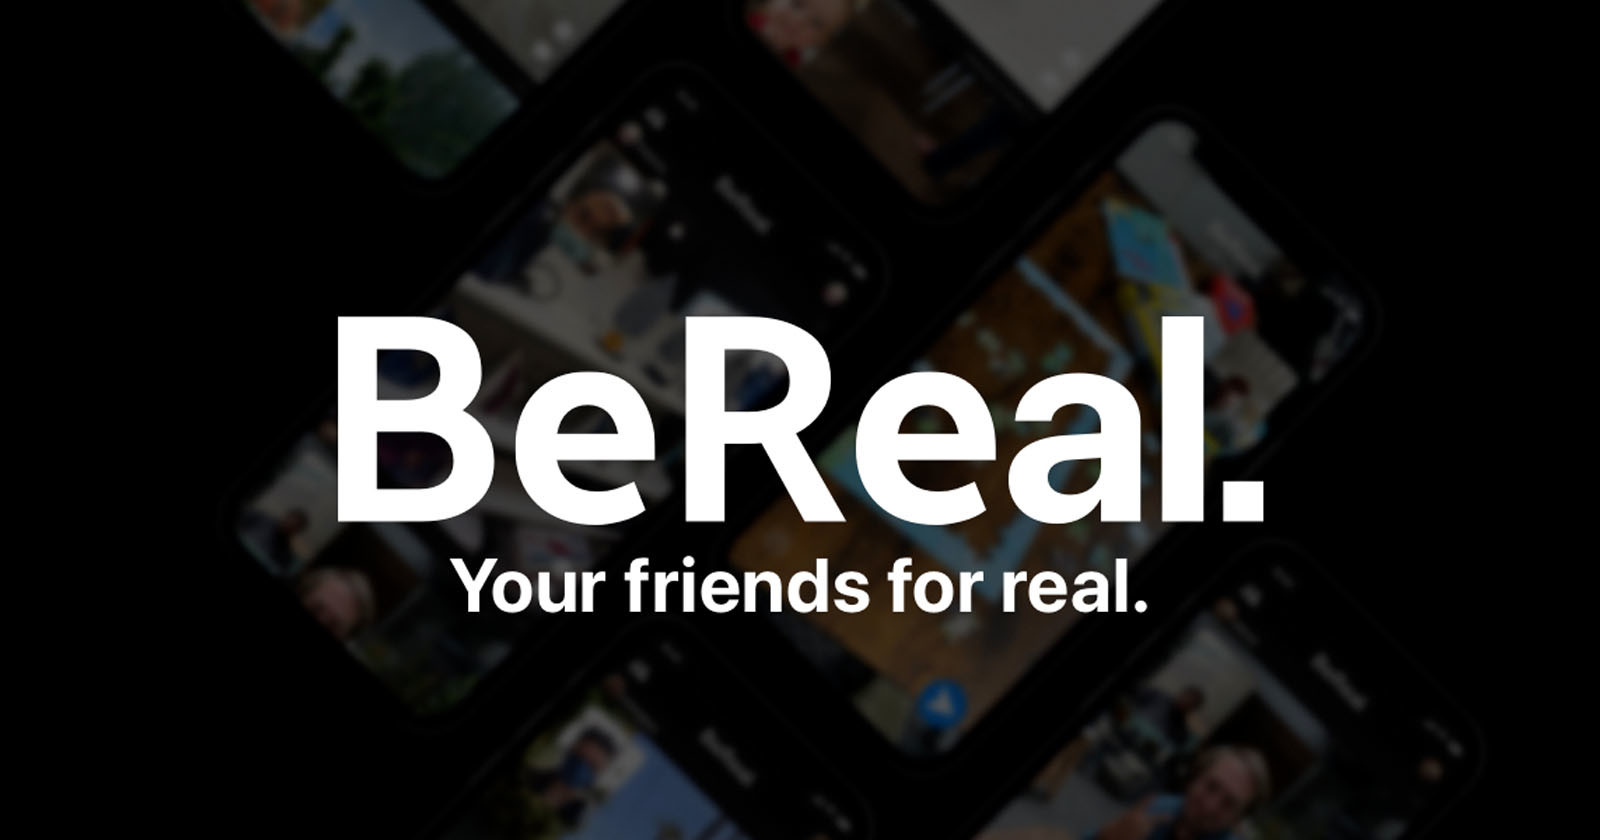  bereal soars over million daily active users 